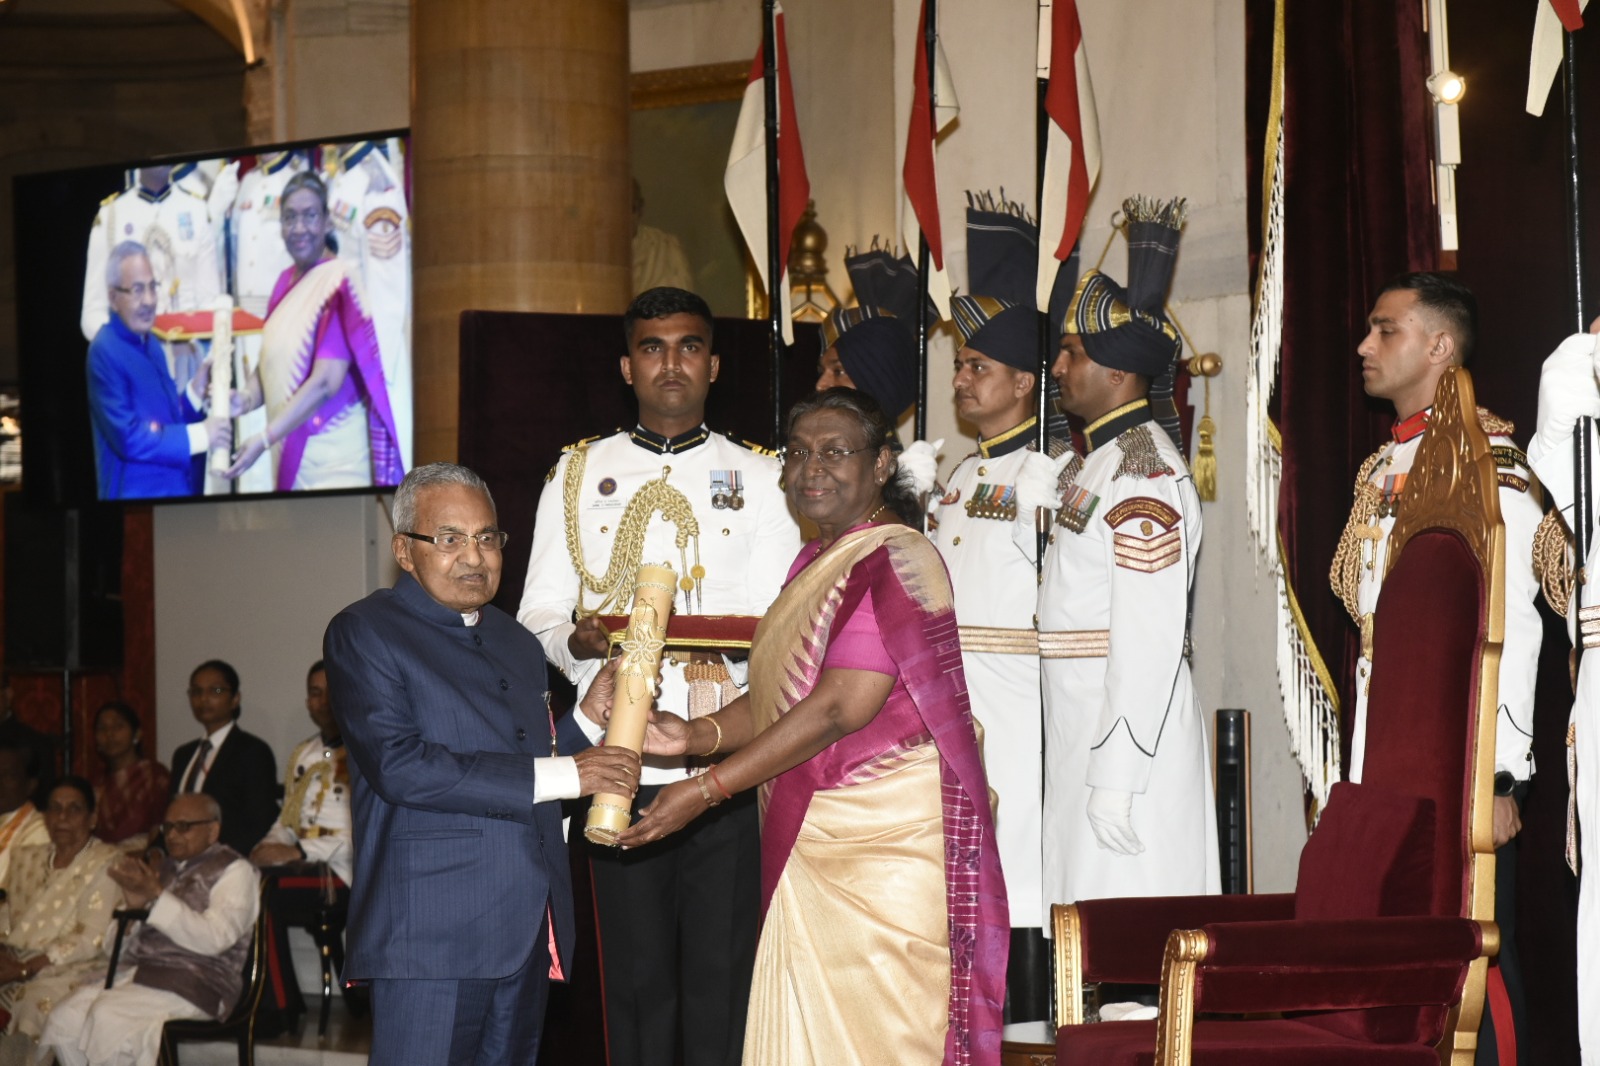 Dr. Sitaram Jindal was Conferred with the Prestigious Padma Bhushan Award by the President of India.